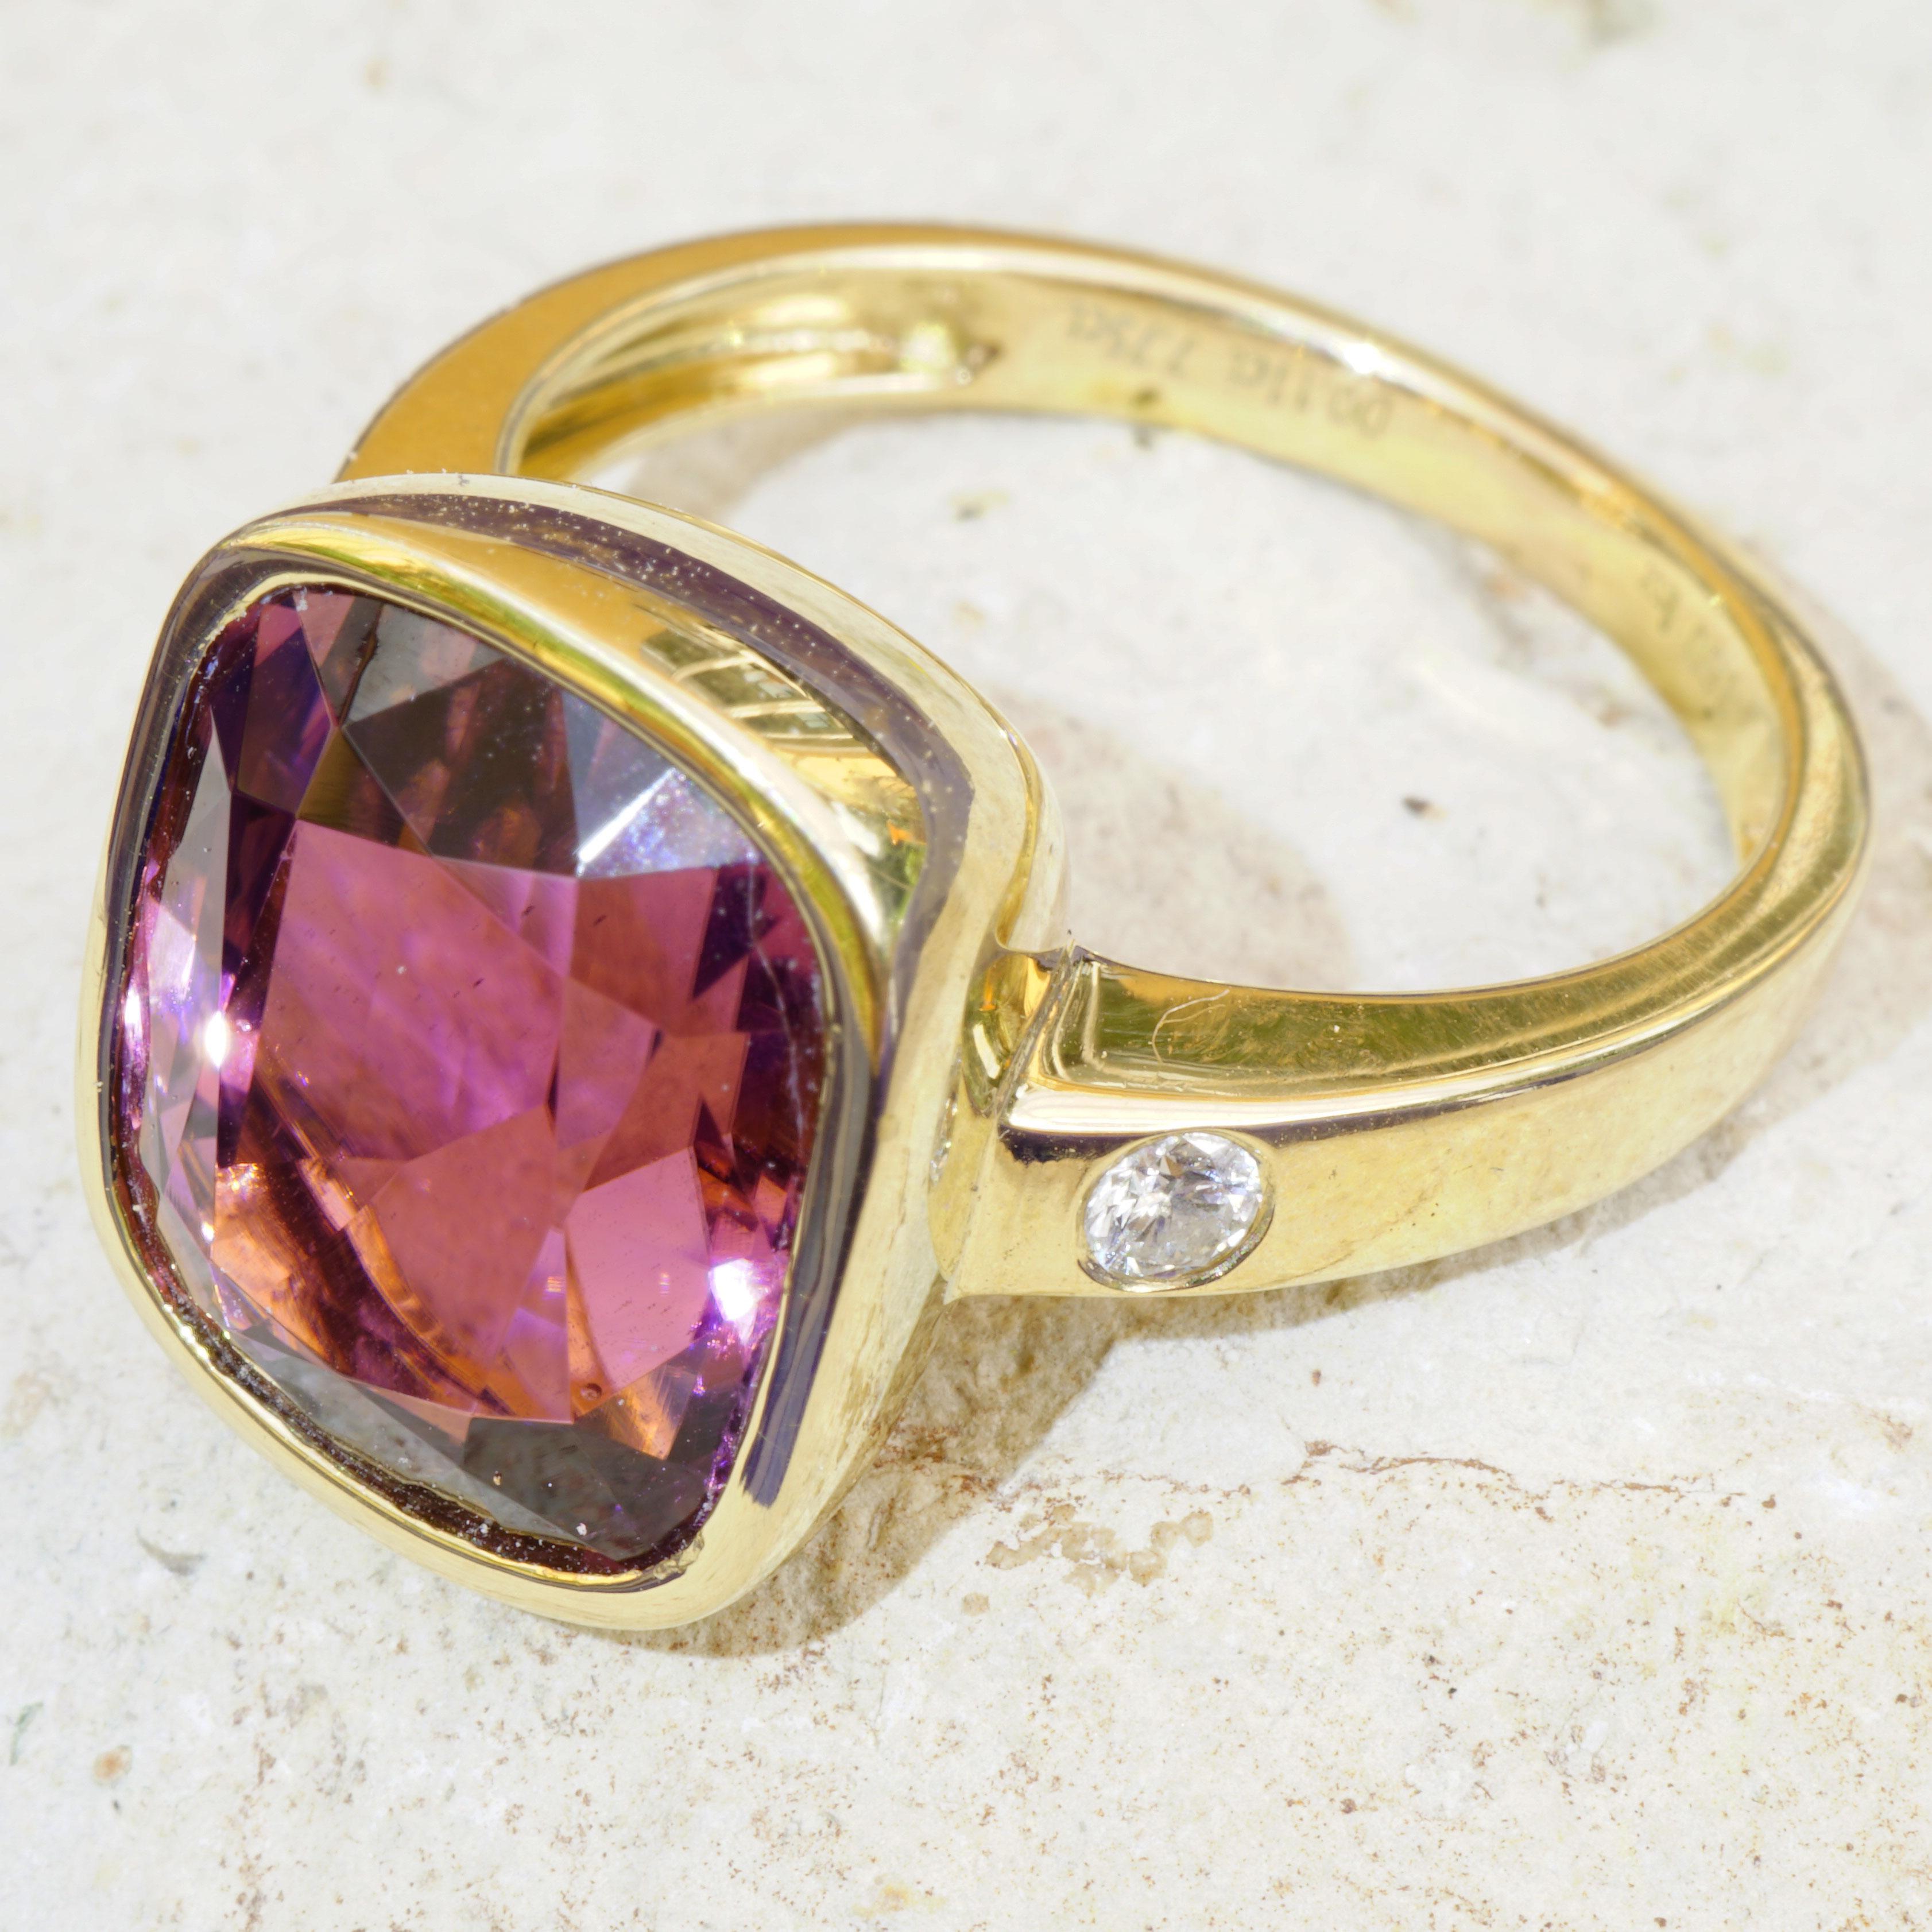 a terrific intense pink tone with a hint of apricot hallmarked with the Schmuckzicke logo, this ring will be a special friend, a tourmaline in the exceptional color deep pink with a gemologist's certificate, from the Kunar mine in Afghanistan,